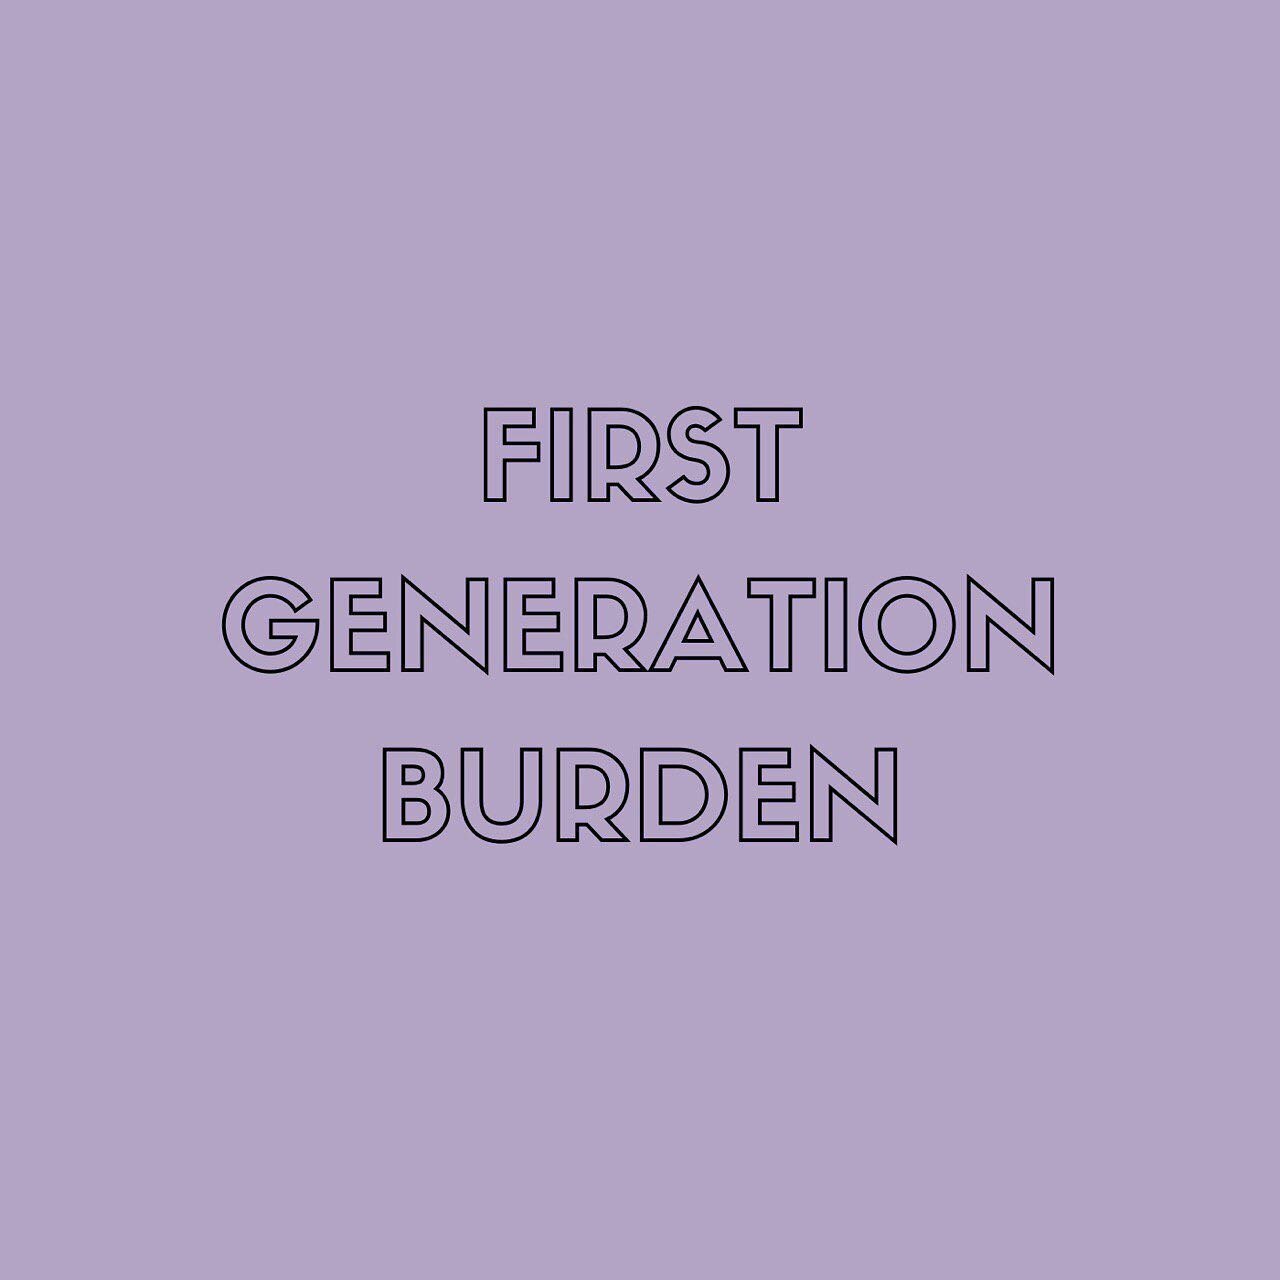 Crossposted from the hit podcast @firstgenburden created and hosted by @rich_tu . We recorded this episode when New York City was first ordered to shelter-in-place back in late March. We talk about anti-Asian sentiments across the country, the percep